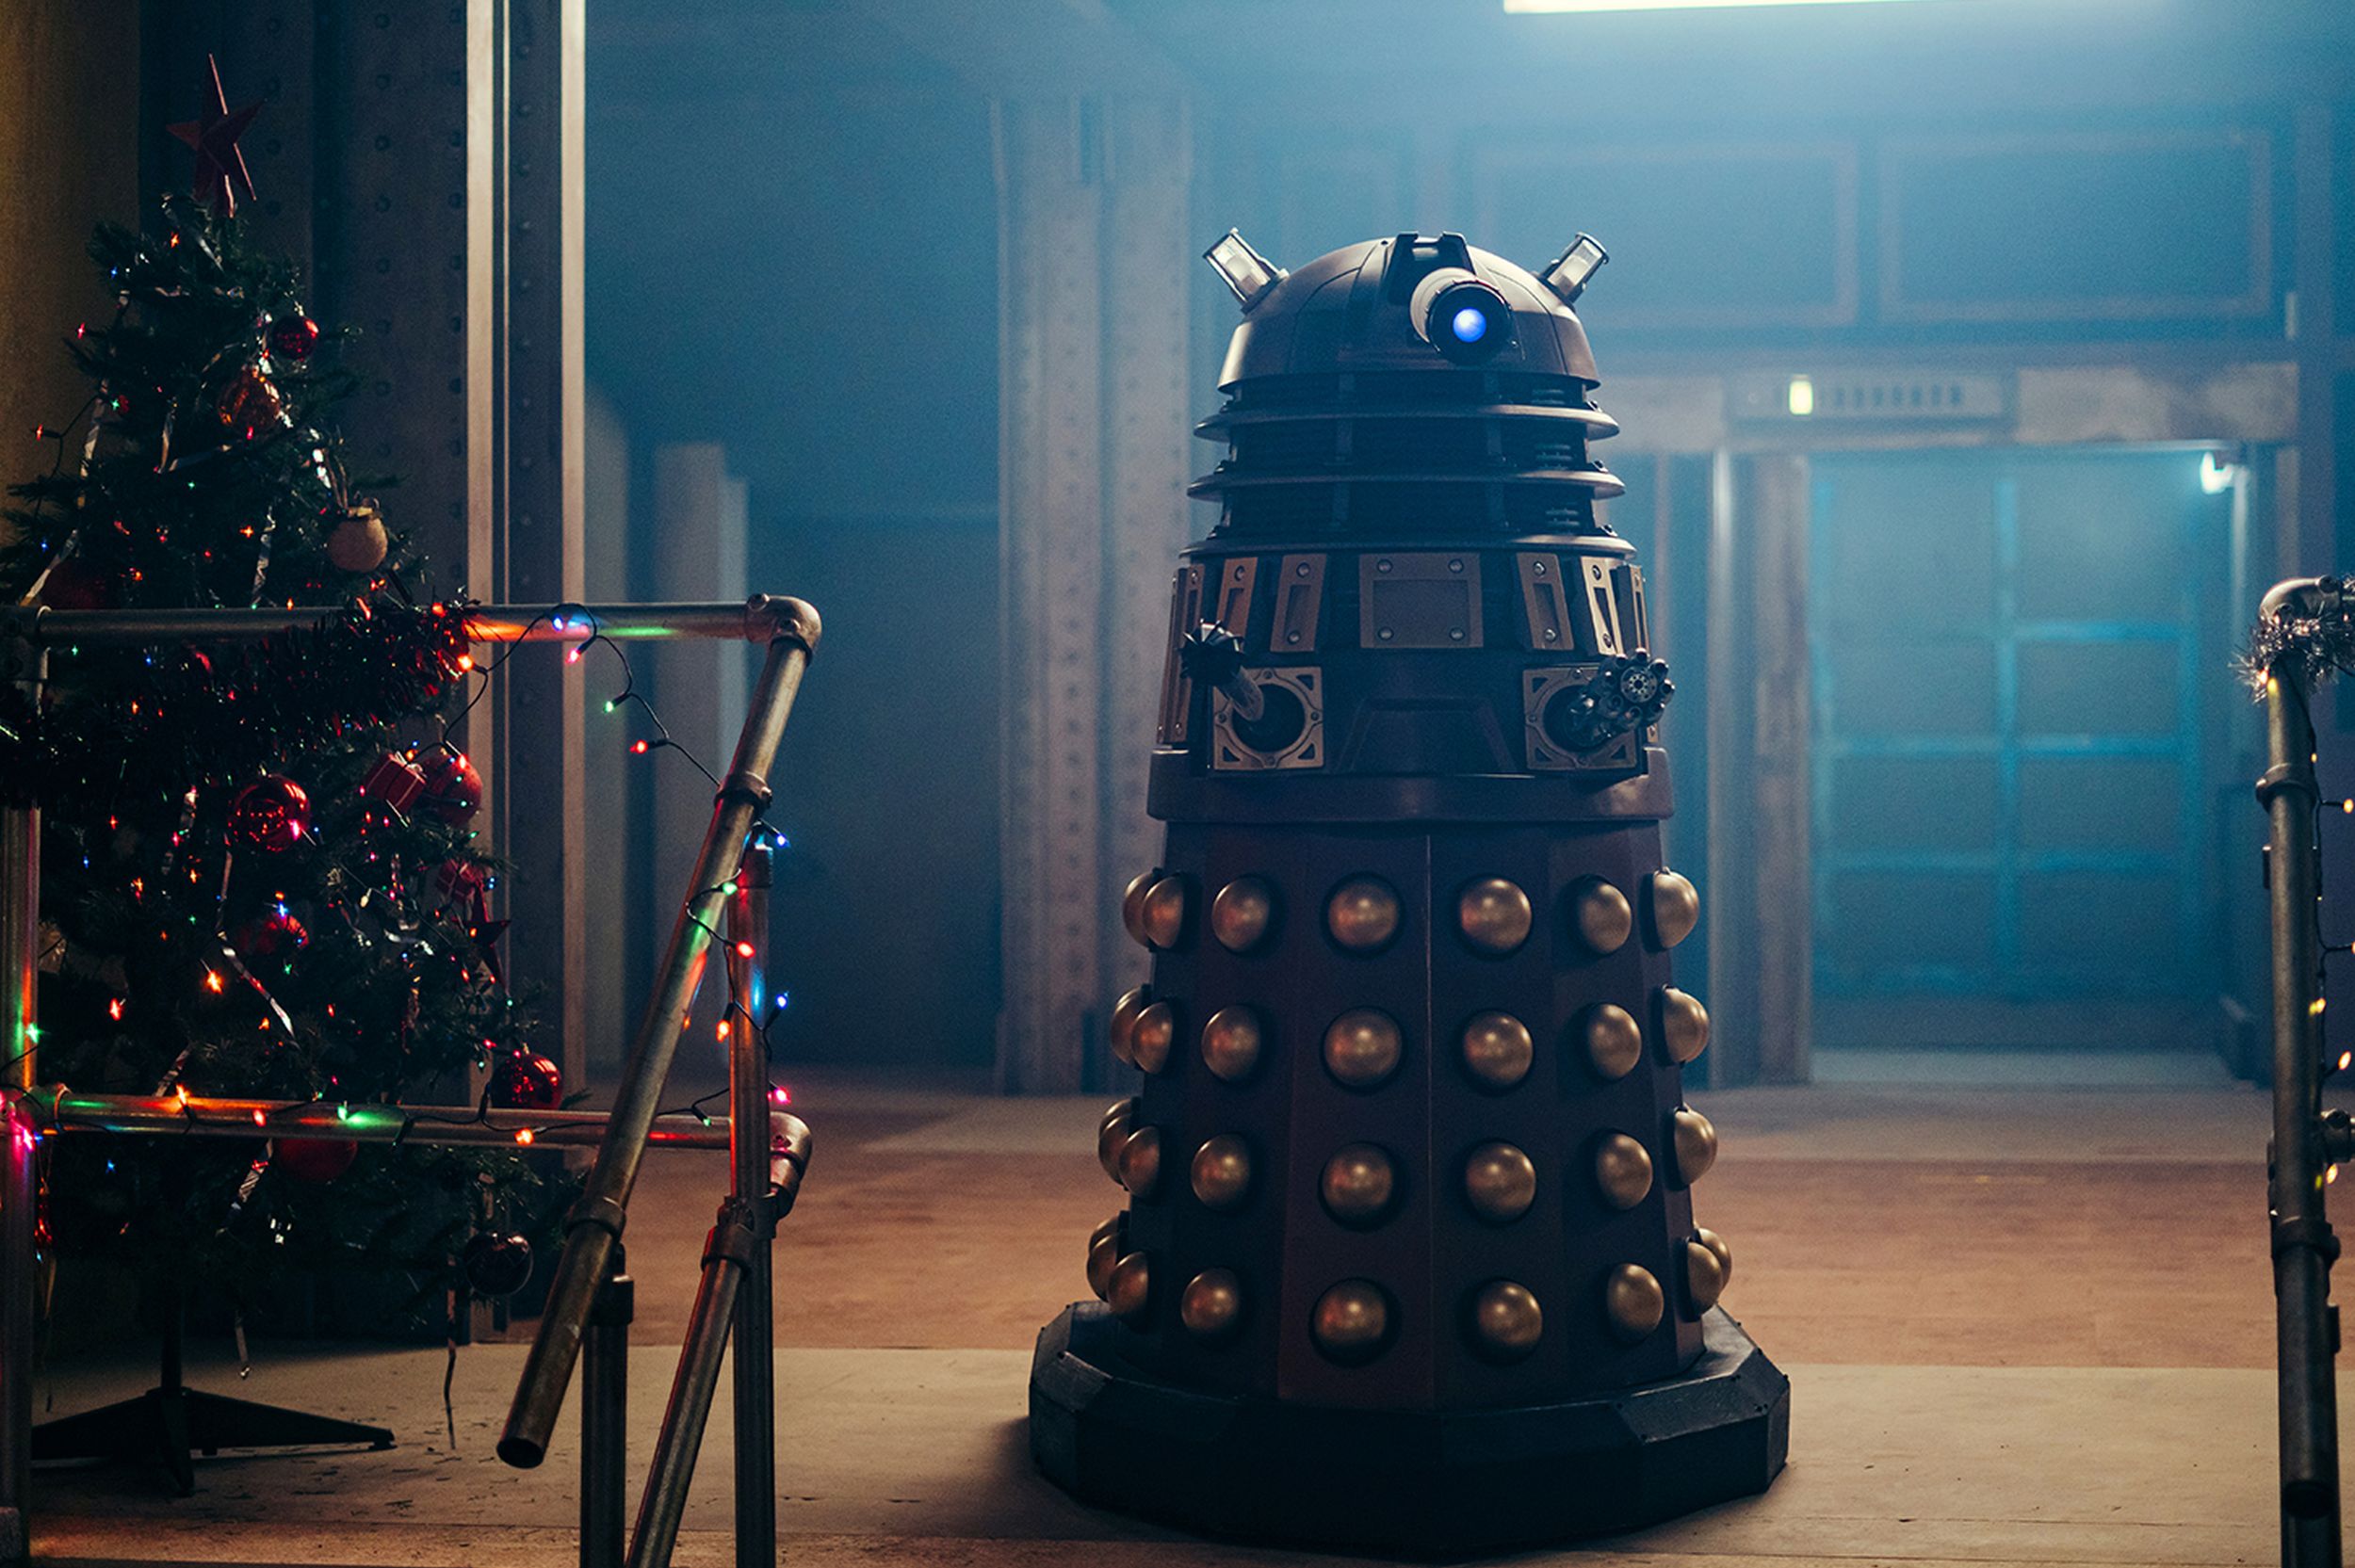 A Dalek in Doctor Who: Eve of the Daleks